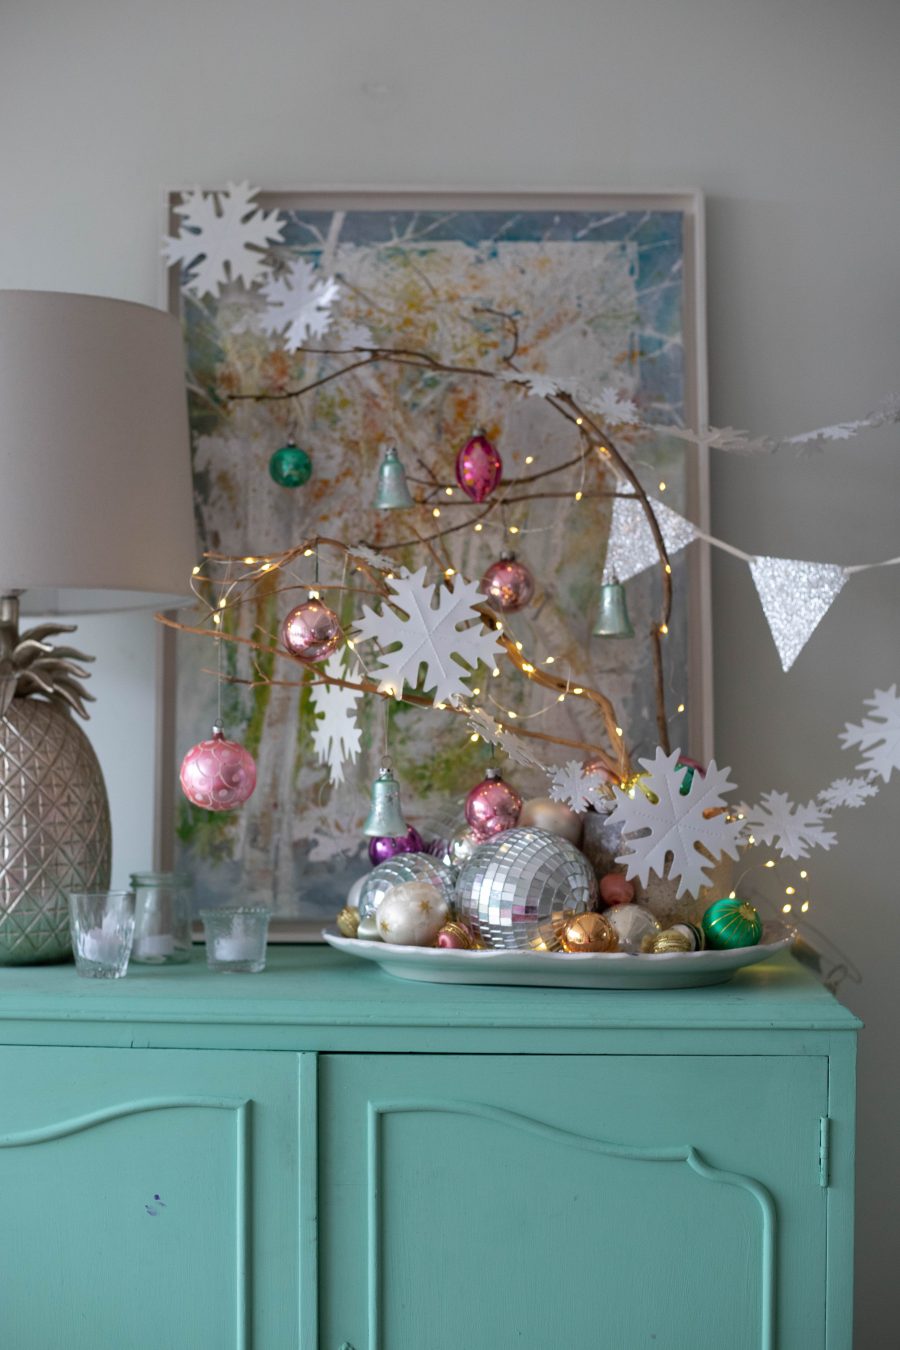 Christmas decorations with vintage baubles